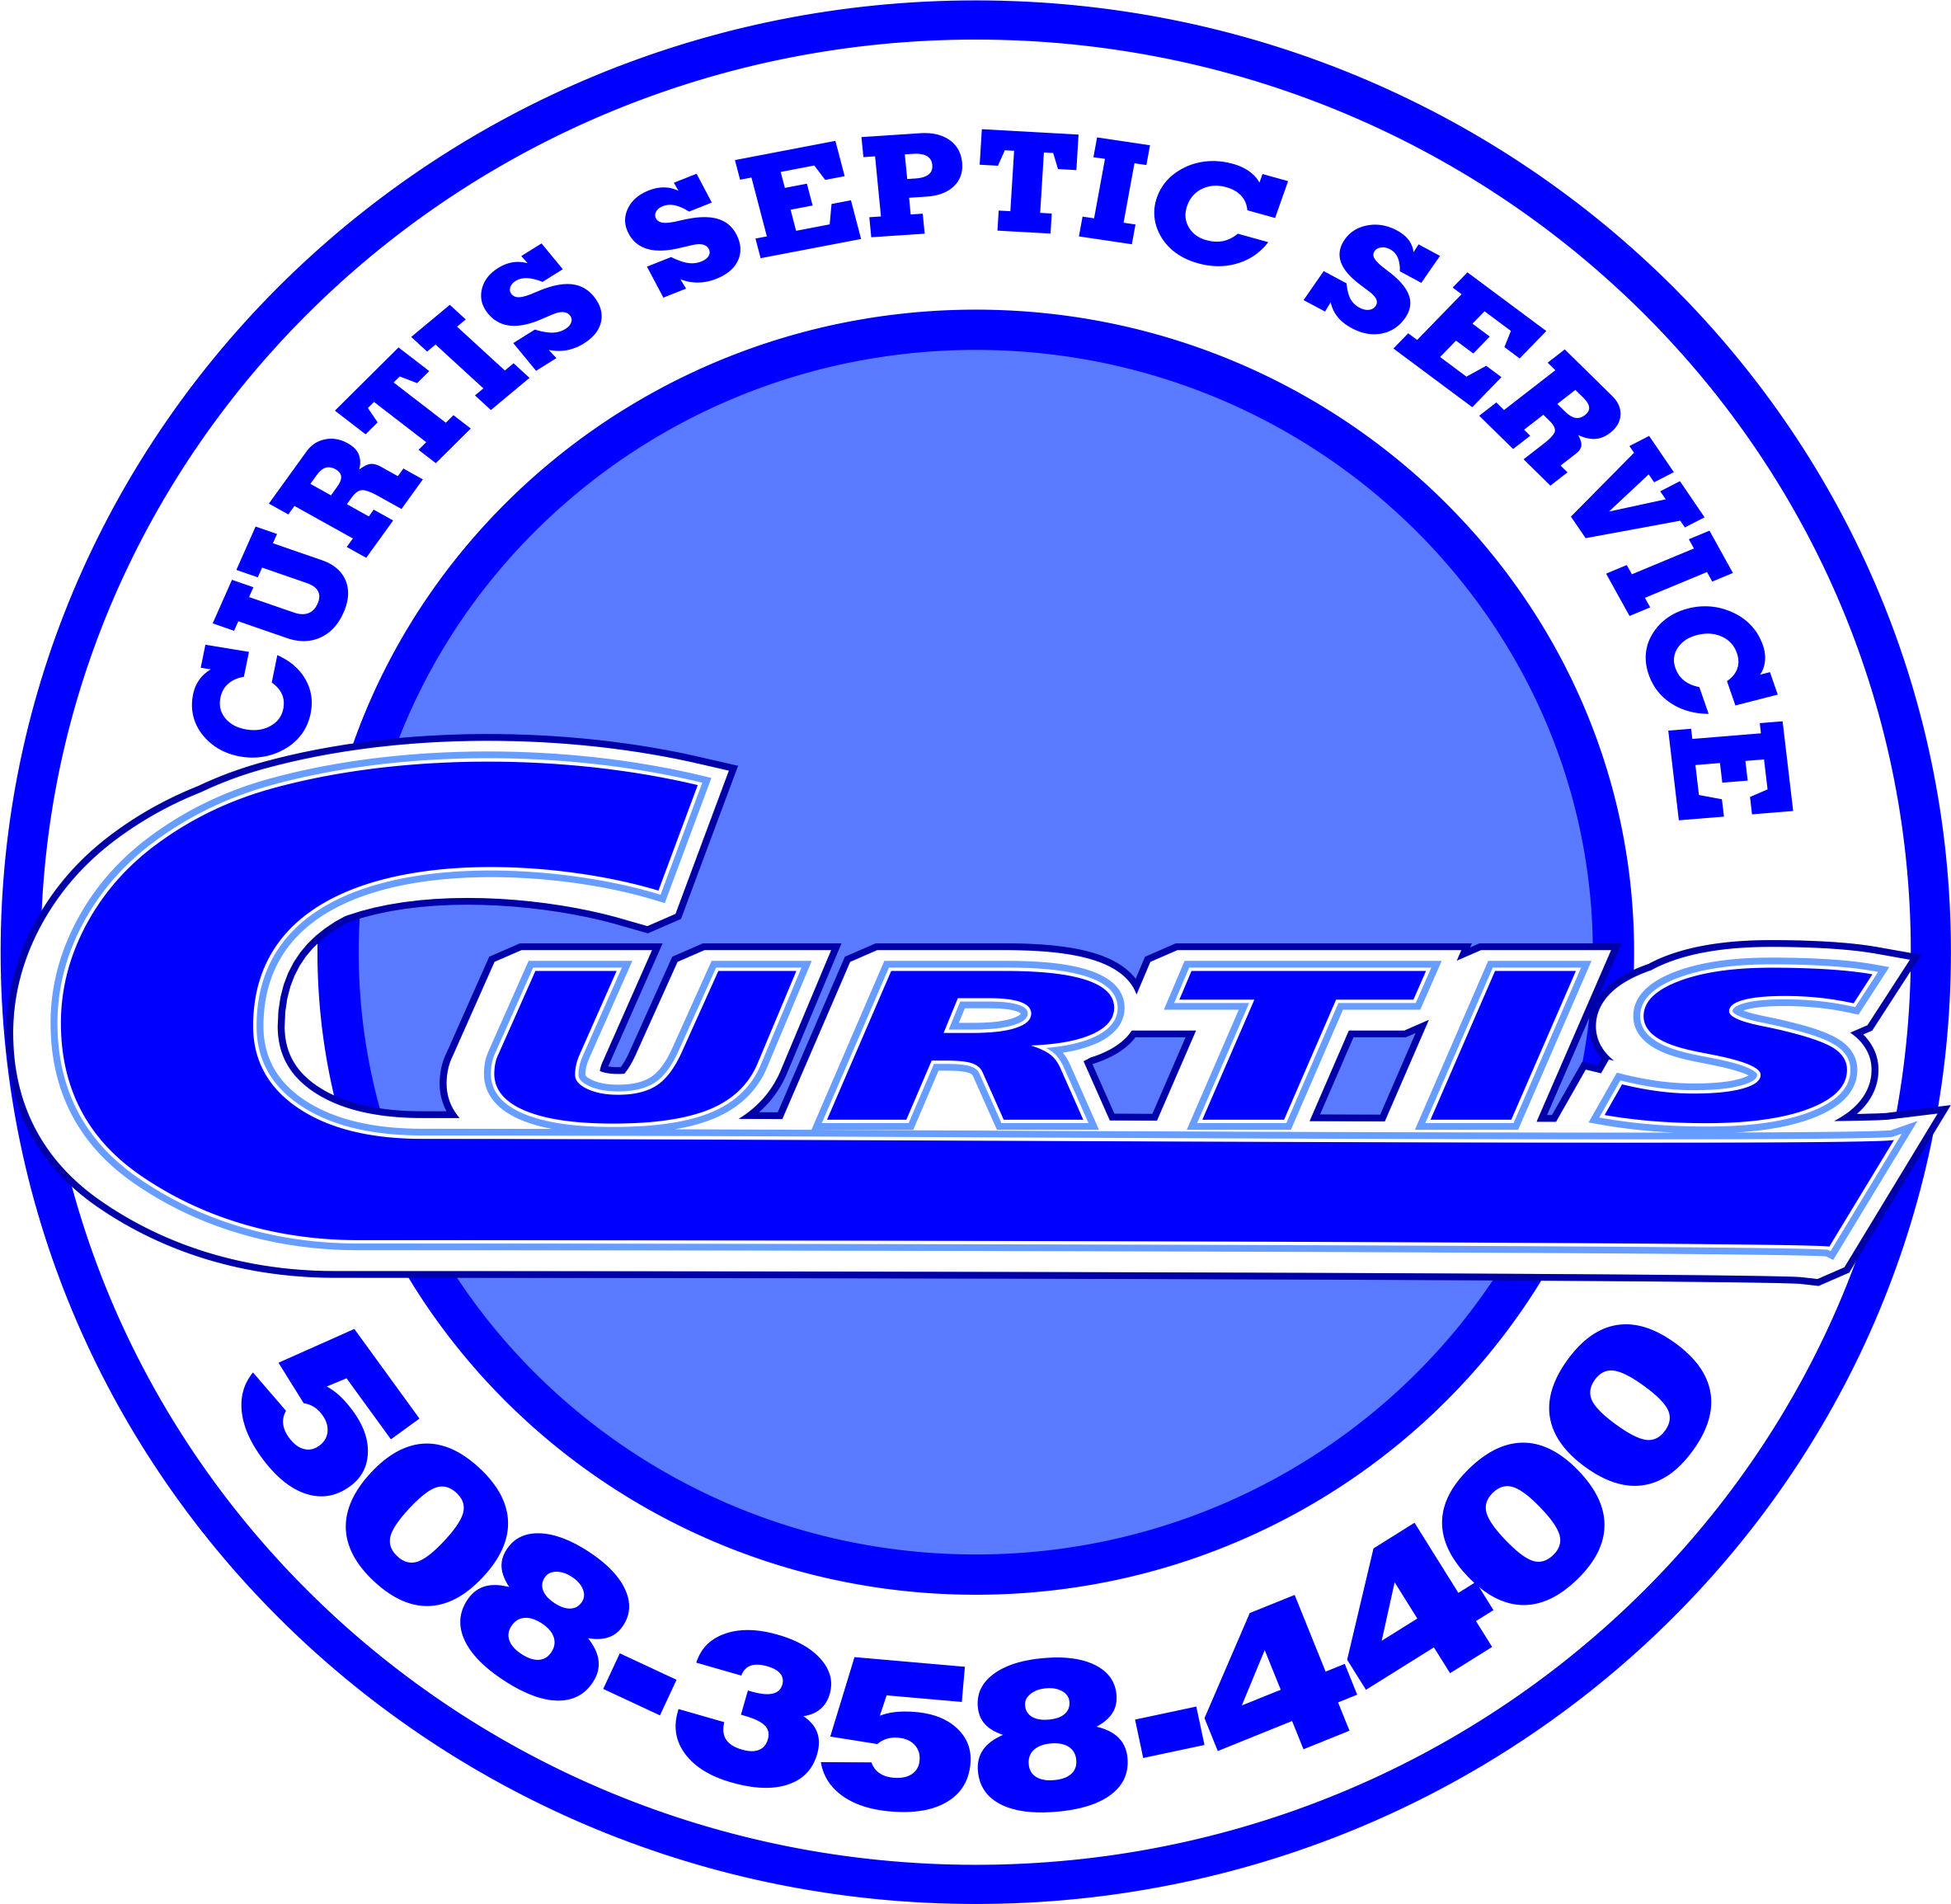 Septic system inspectors in Ashby, MA.